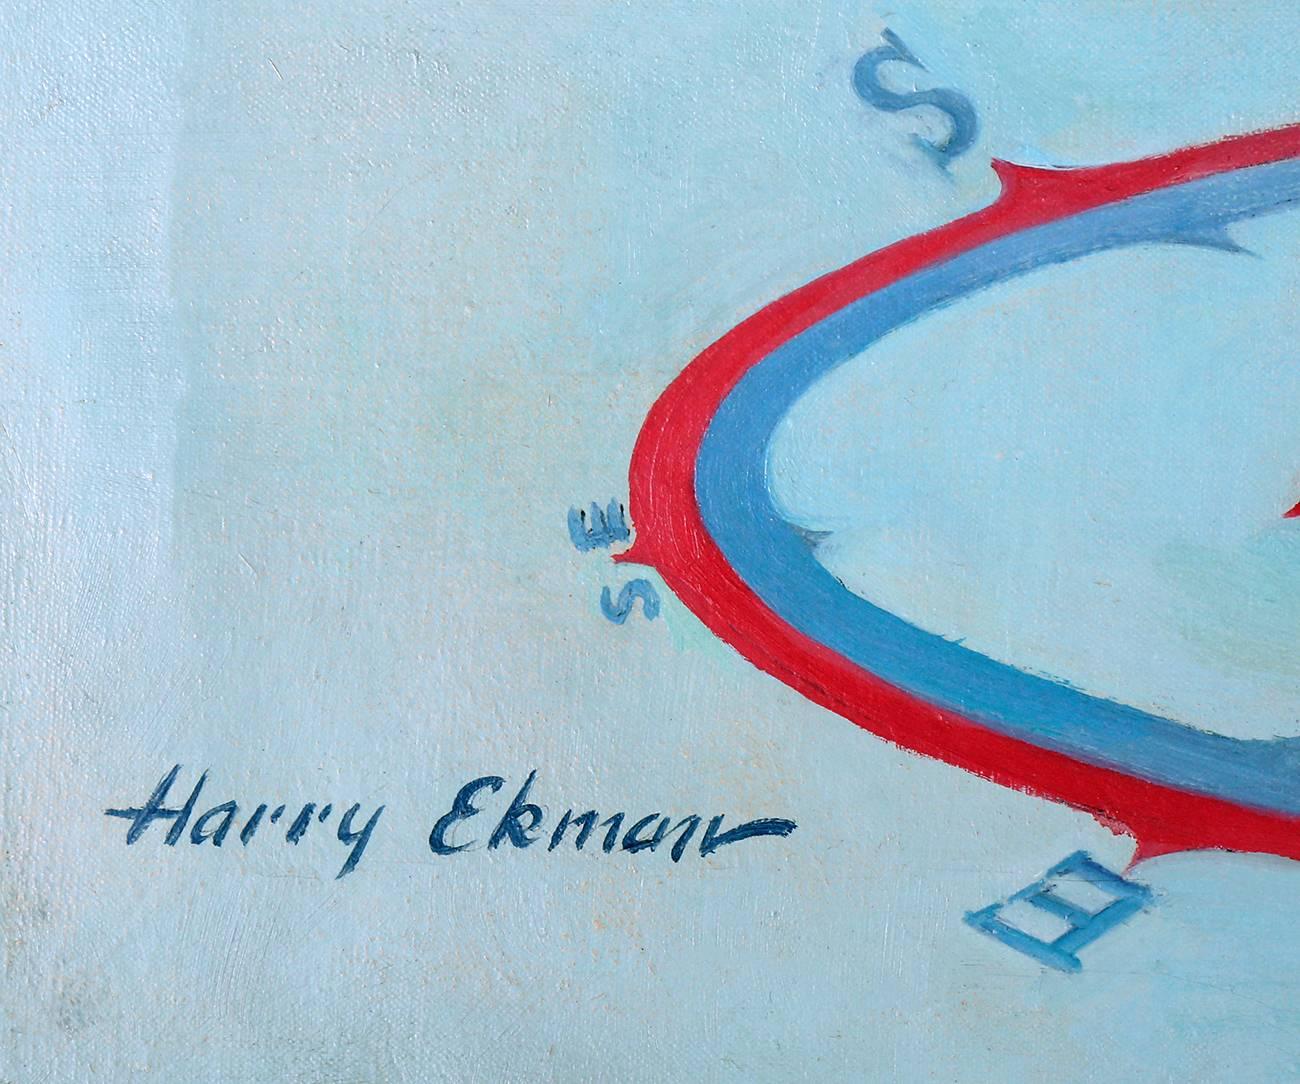 I Don't Go Too Far In Any Direction! - Painting by Harry Ekman